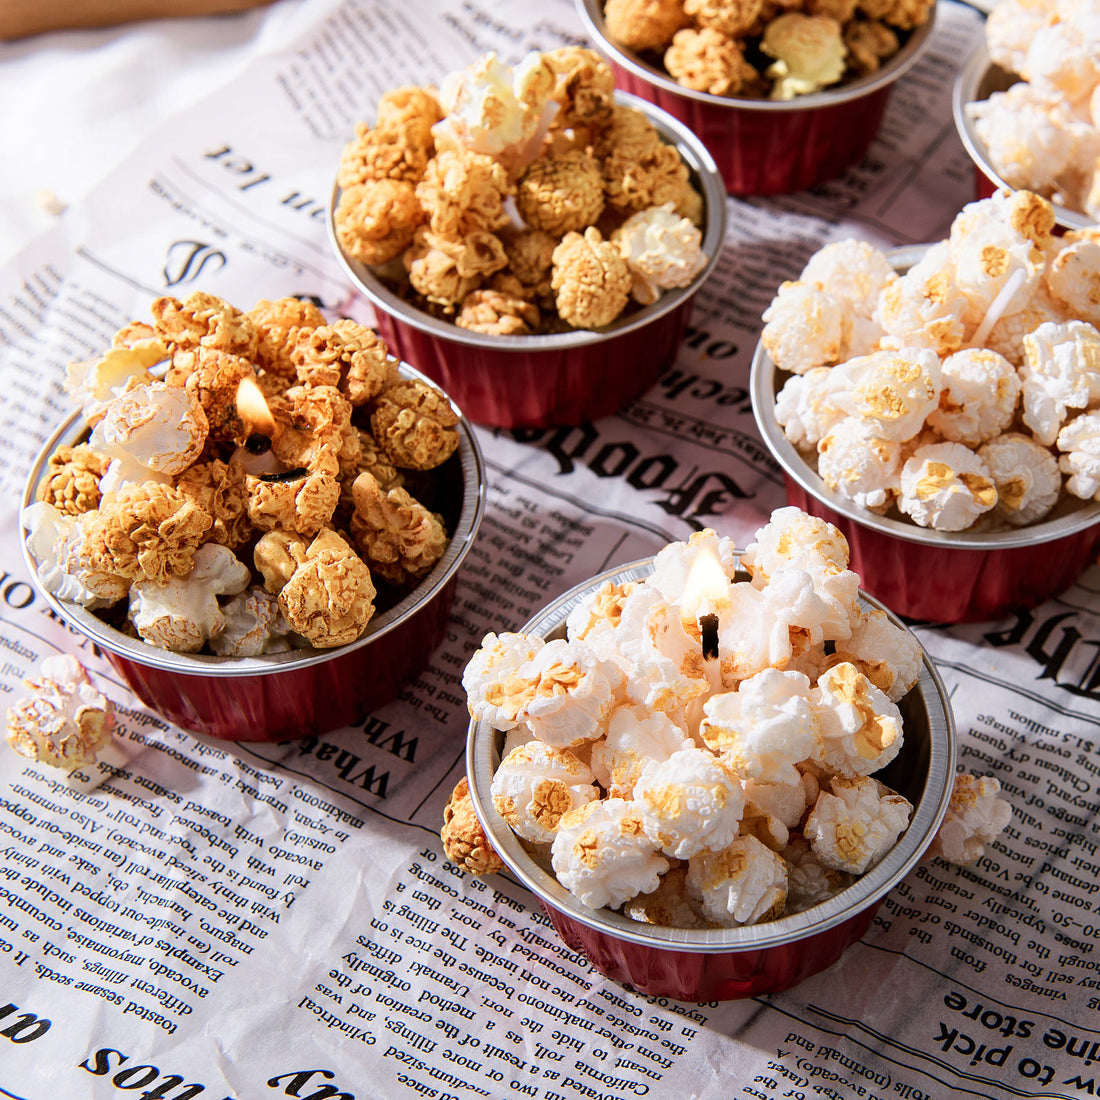 We’re bringing cute Popcorn candles back to life again.